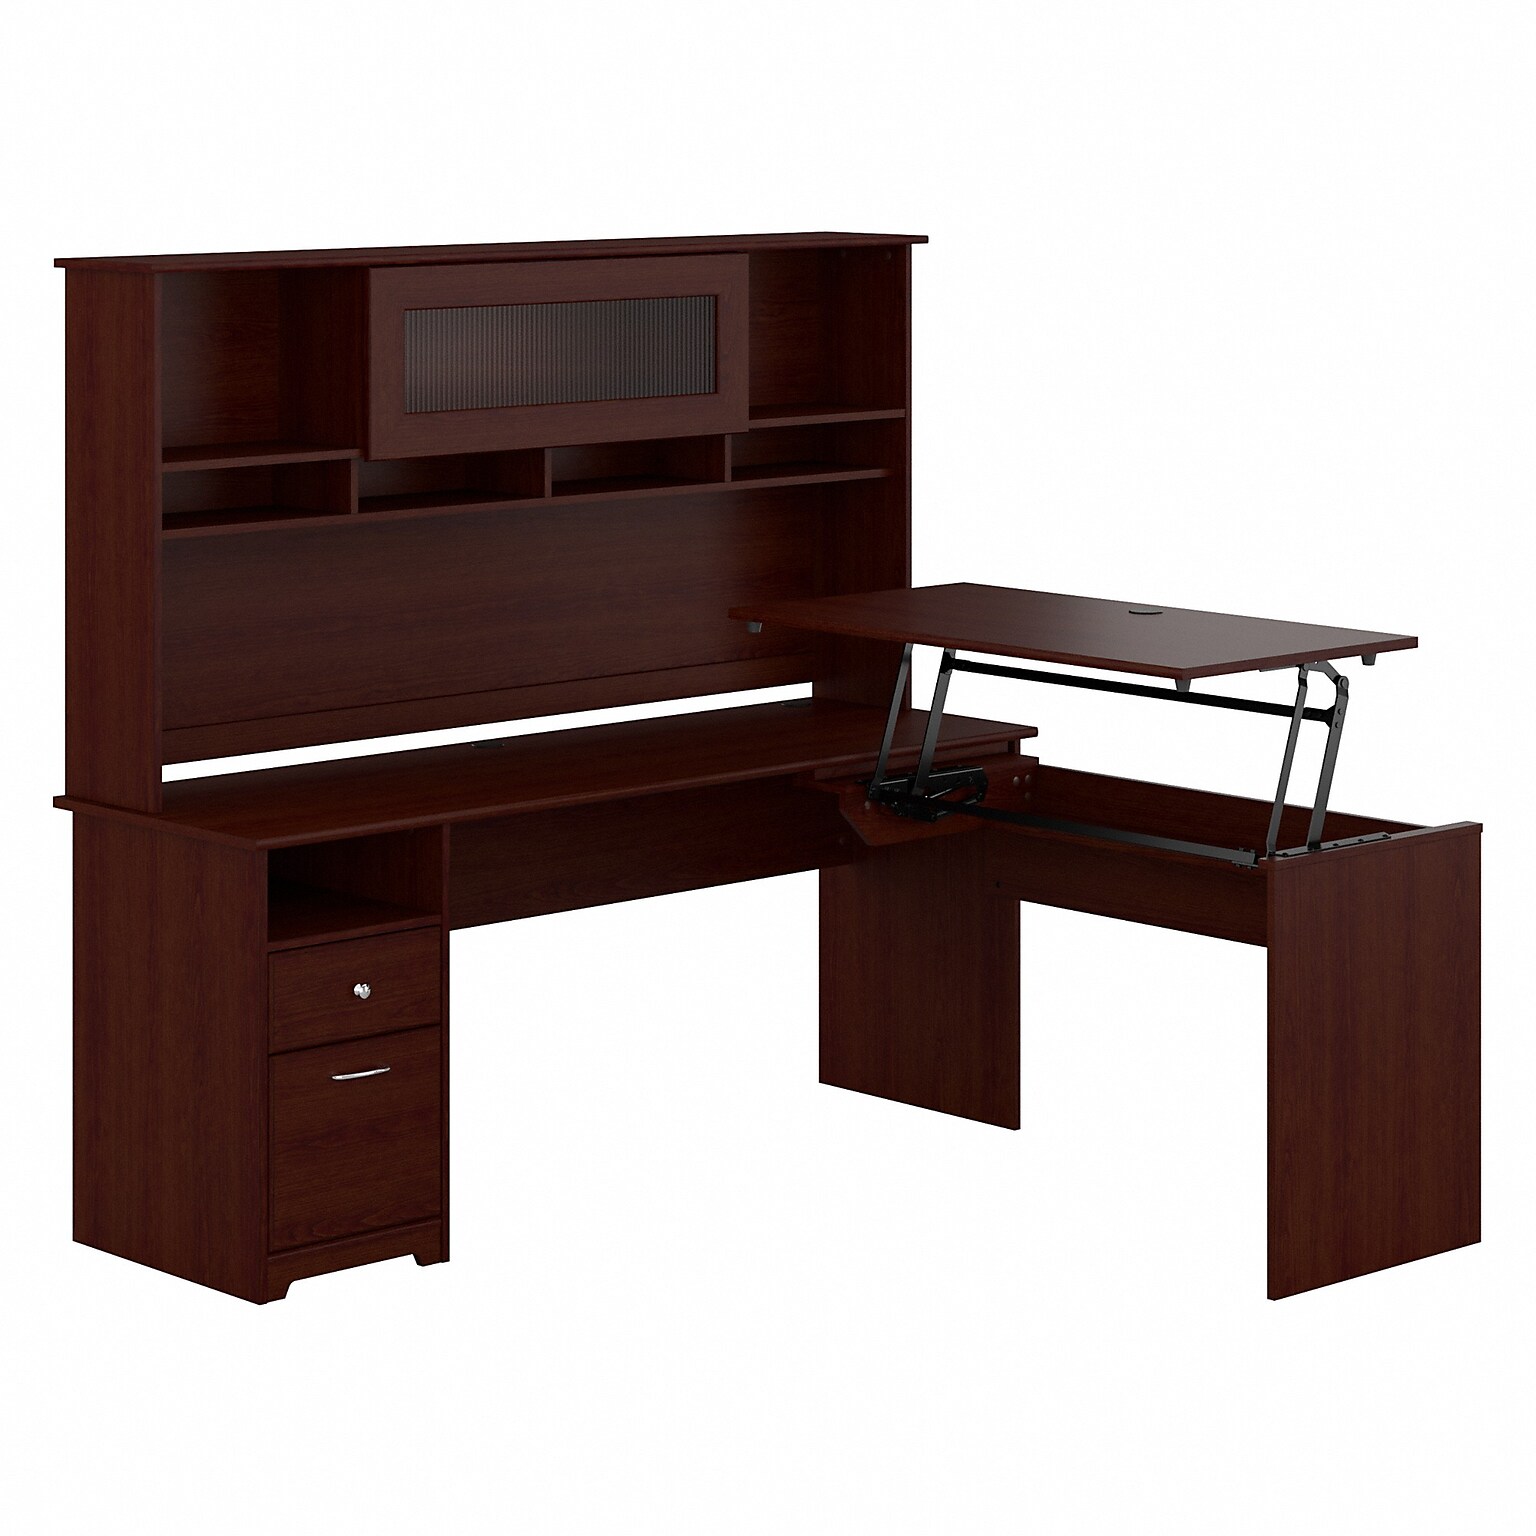 Bush Furniture Cabot 72W 3 Position L Shaped Sit to Stand Desk with Hutch, Harvest Cherry (CAB052HVC)